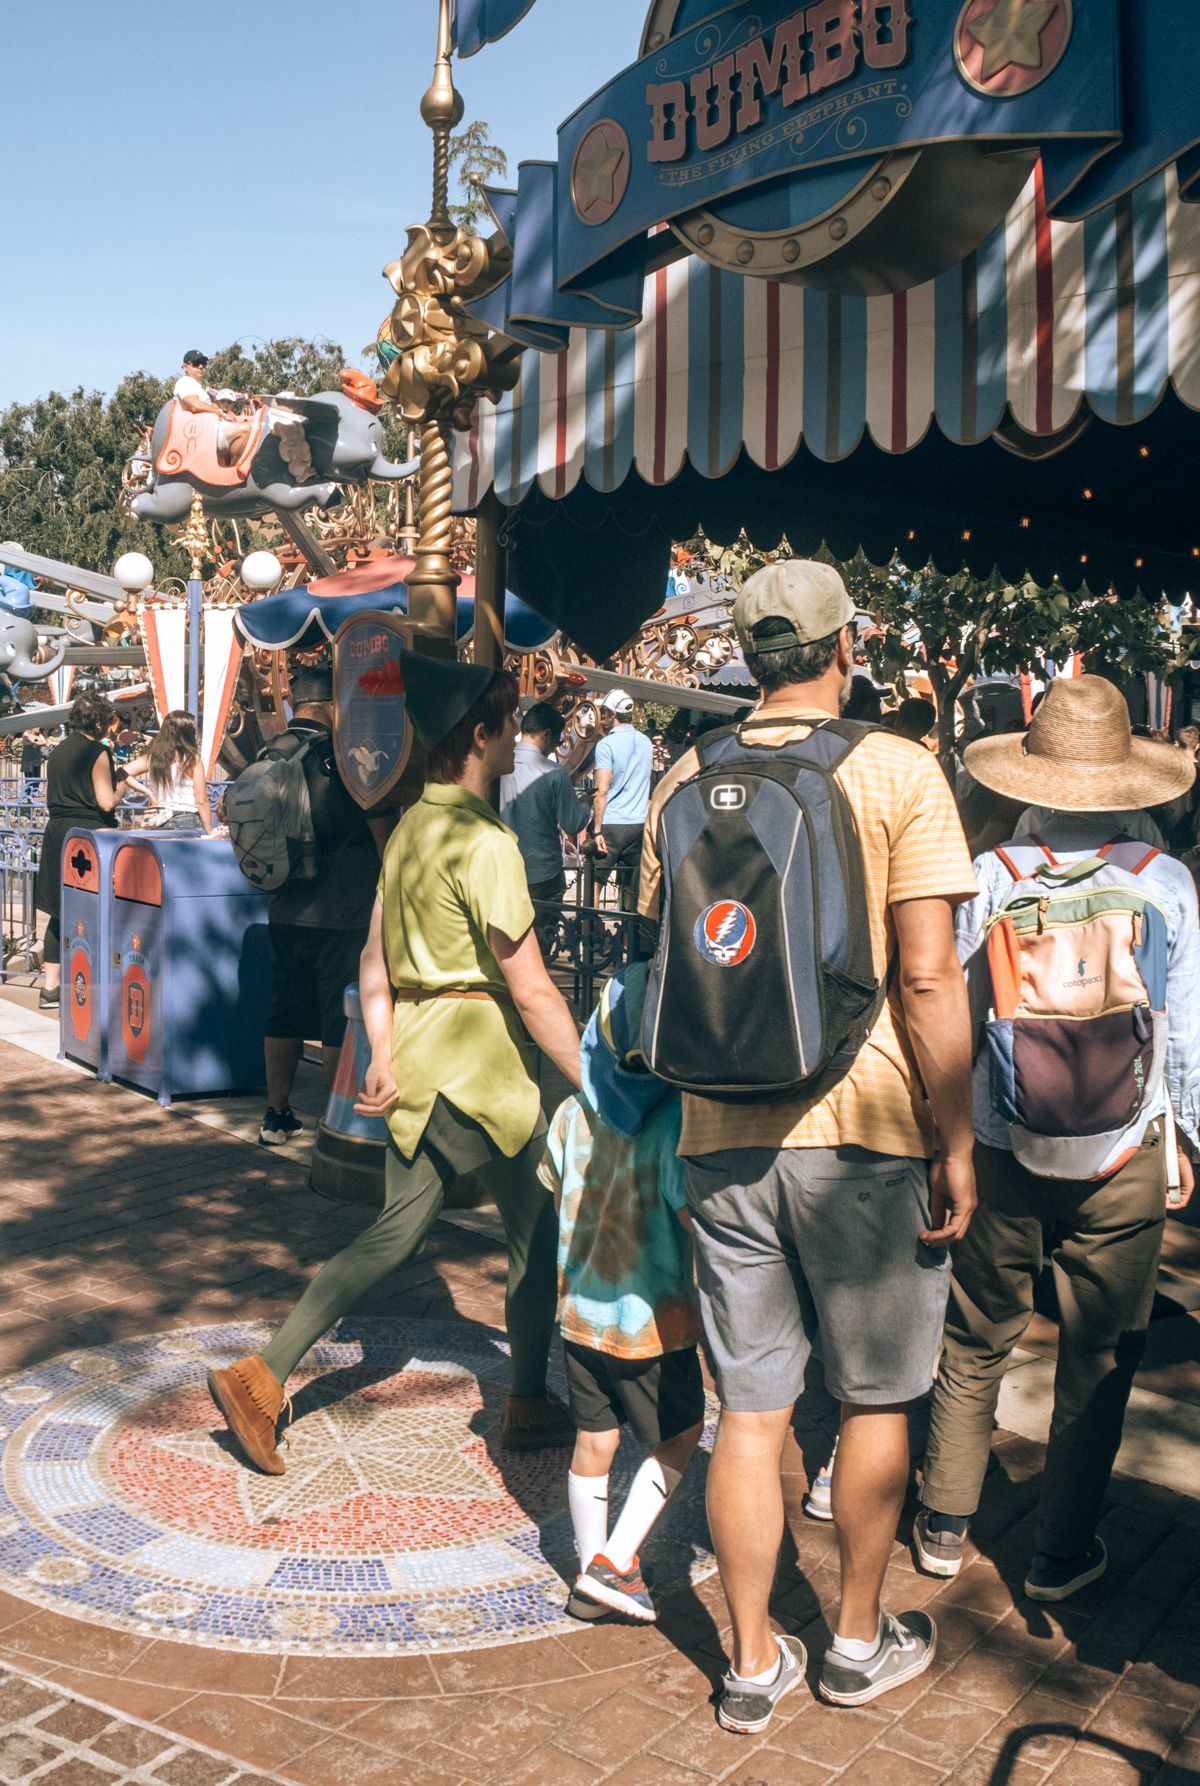 Best Backpacks for Disneyland: two people wearing backpacks, seen from behind, walking with a small boy and a man in a Peter Pan costume at Disneyland.